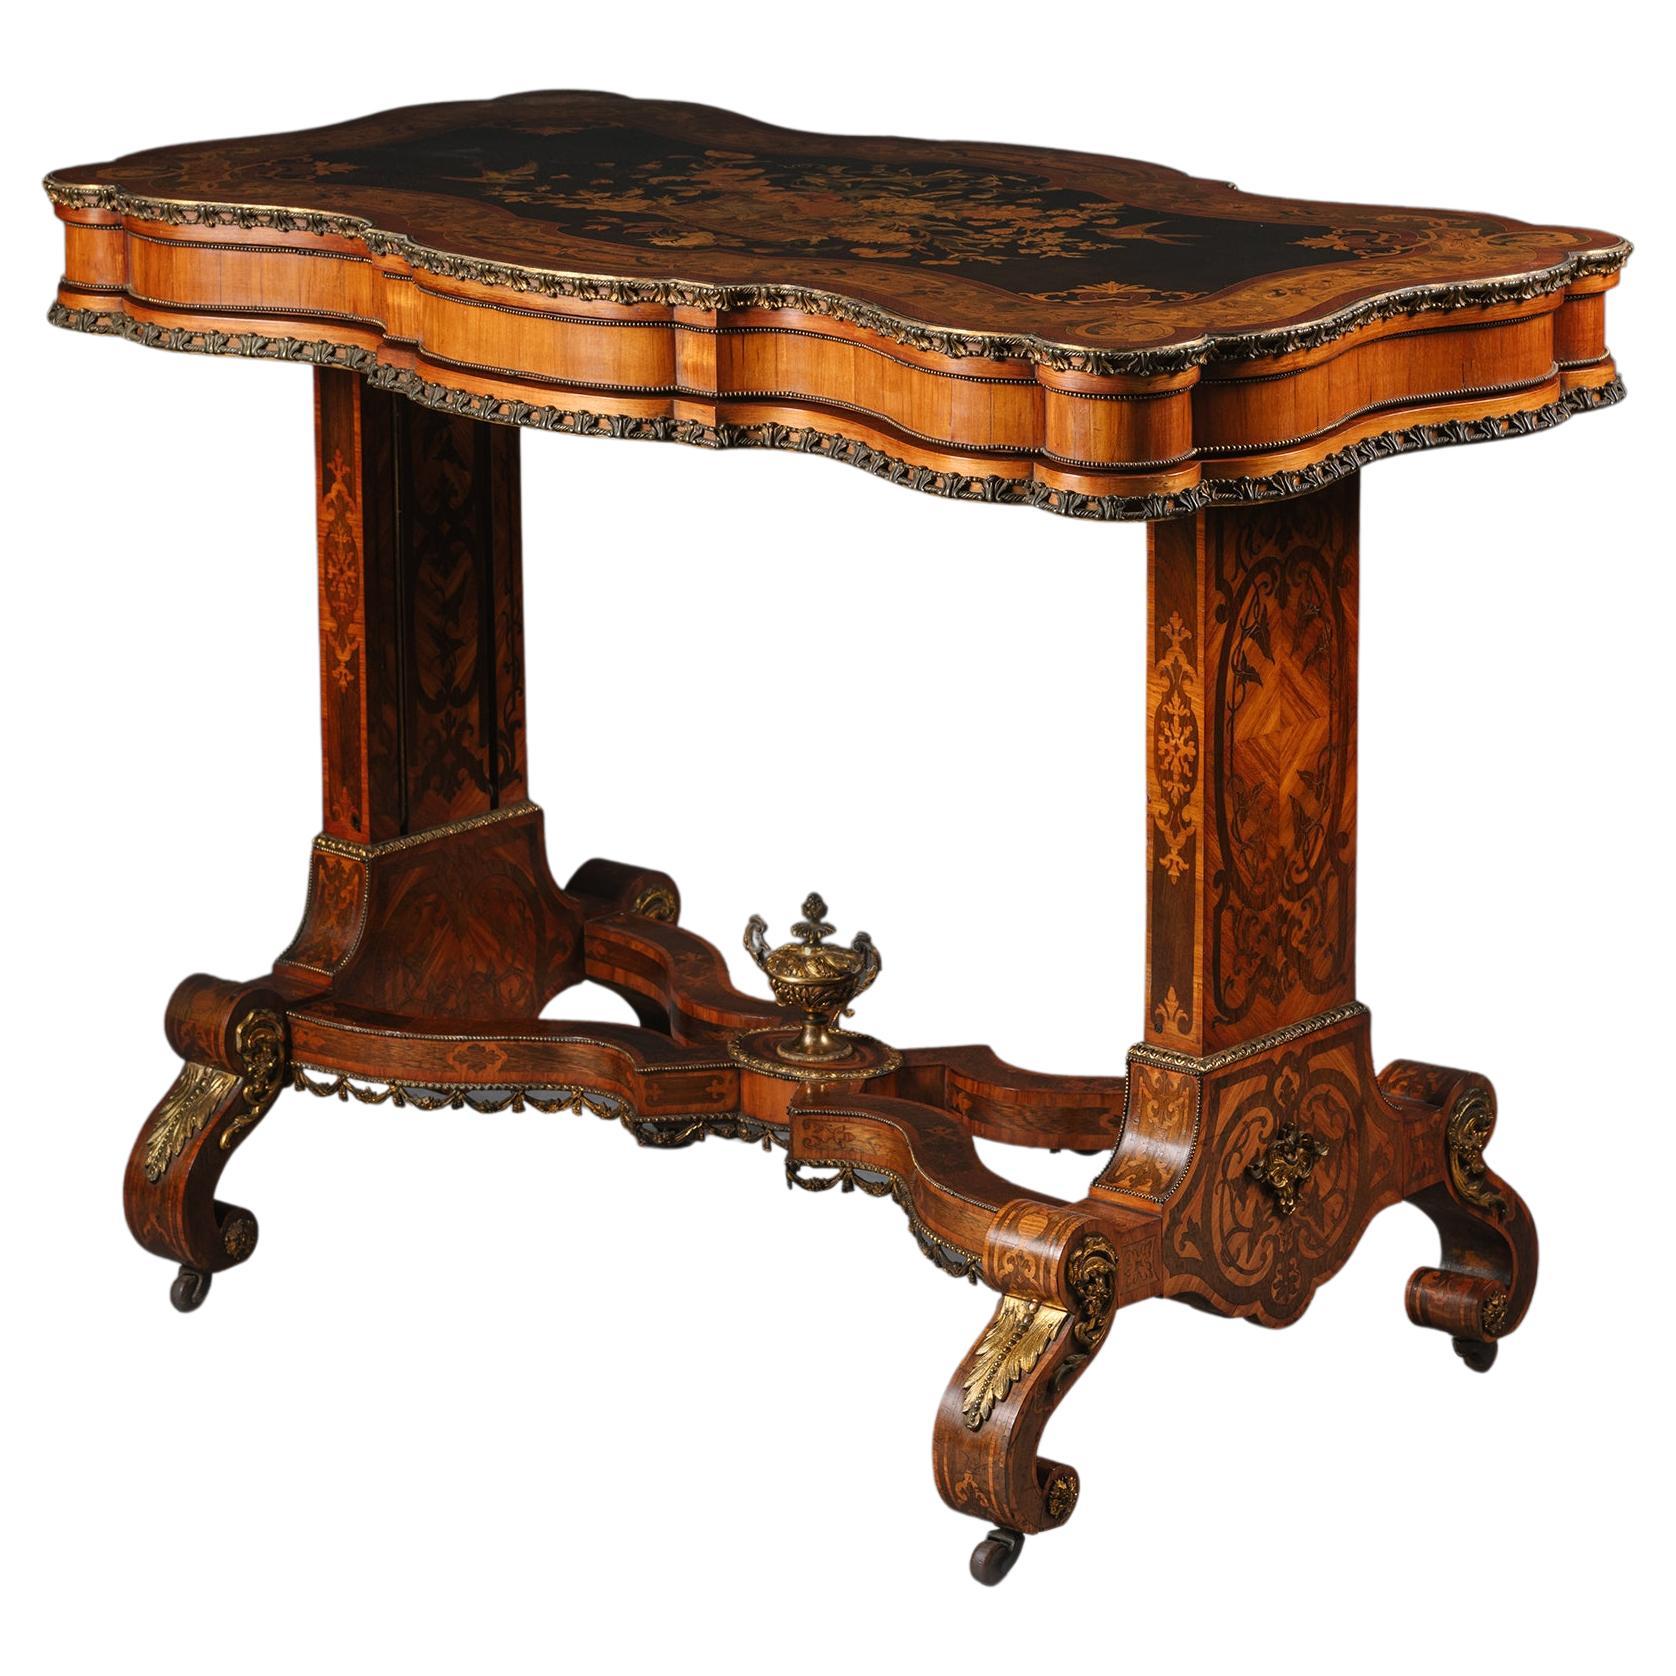 Rare and Unusual Victorian Gilt-Bronze and Marquetry Metamorphic Table For Sale